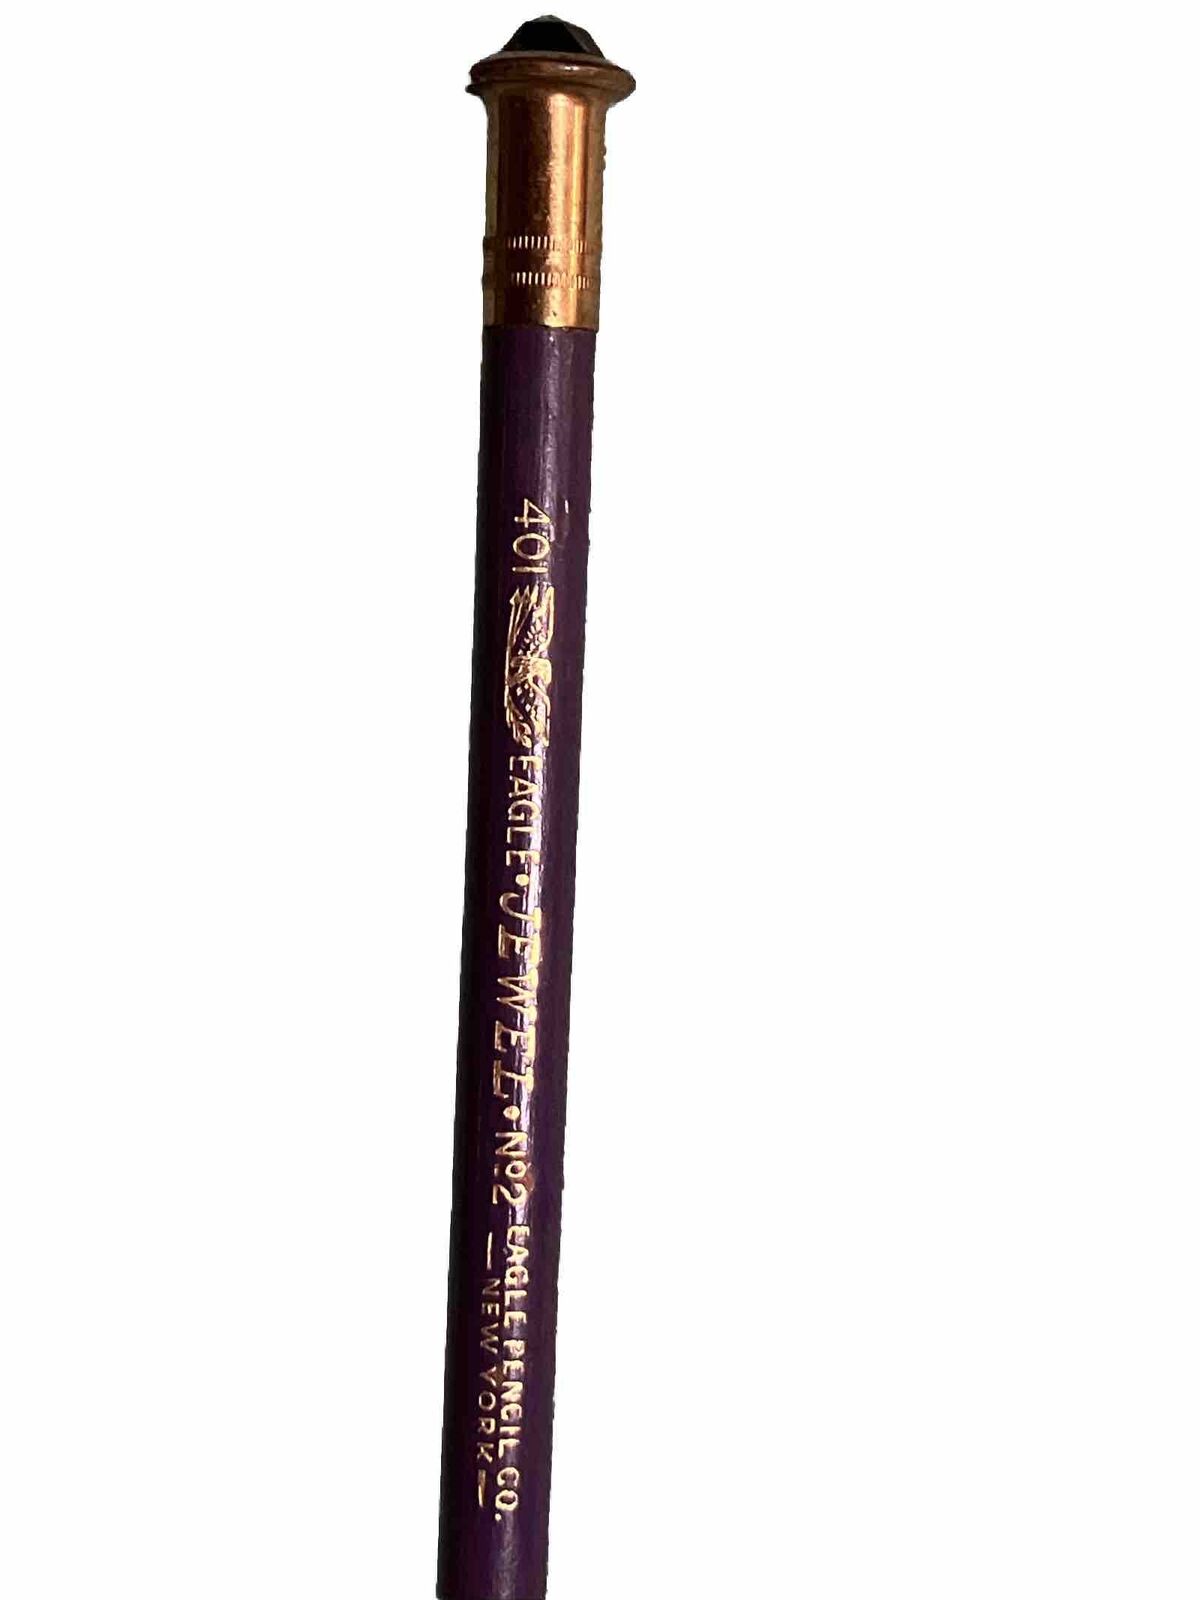 VTG EXTREMELY RARE EAGLE AMETHYST JEWEL No2 PENCIL CO. 401 NEW YORK HARD TO FIND